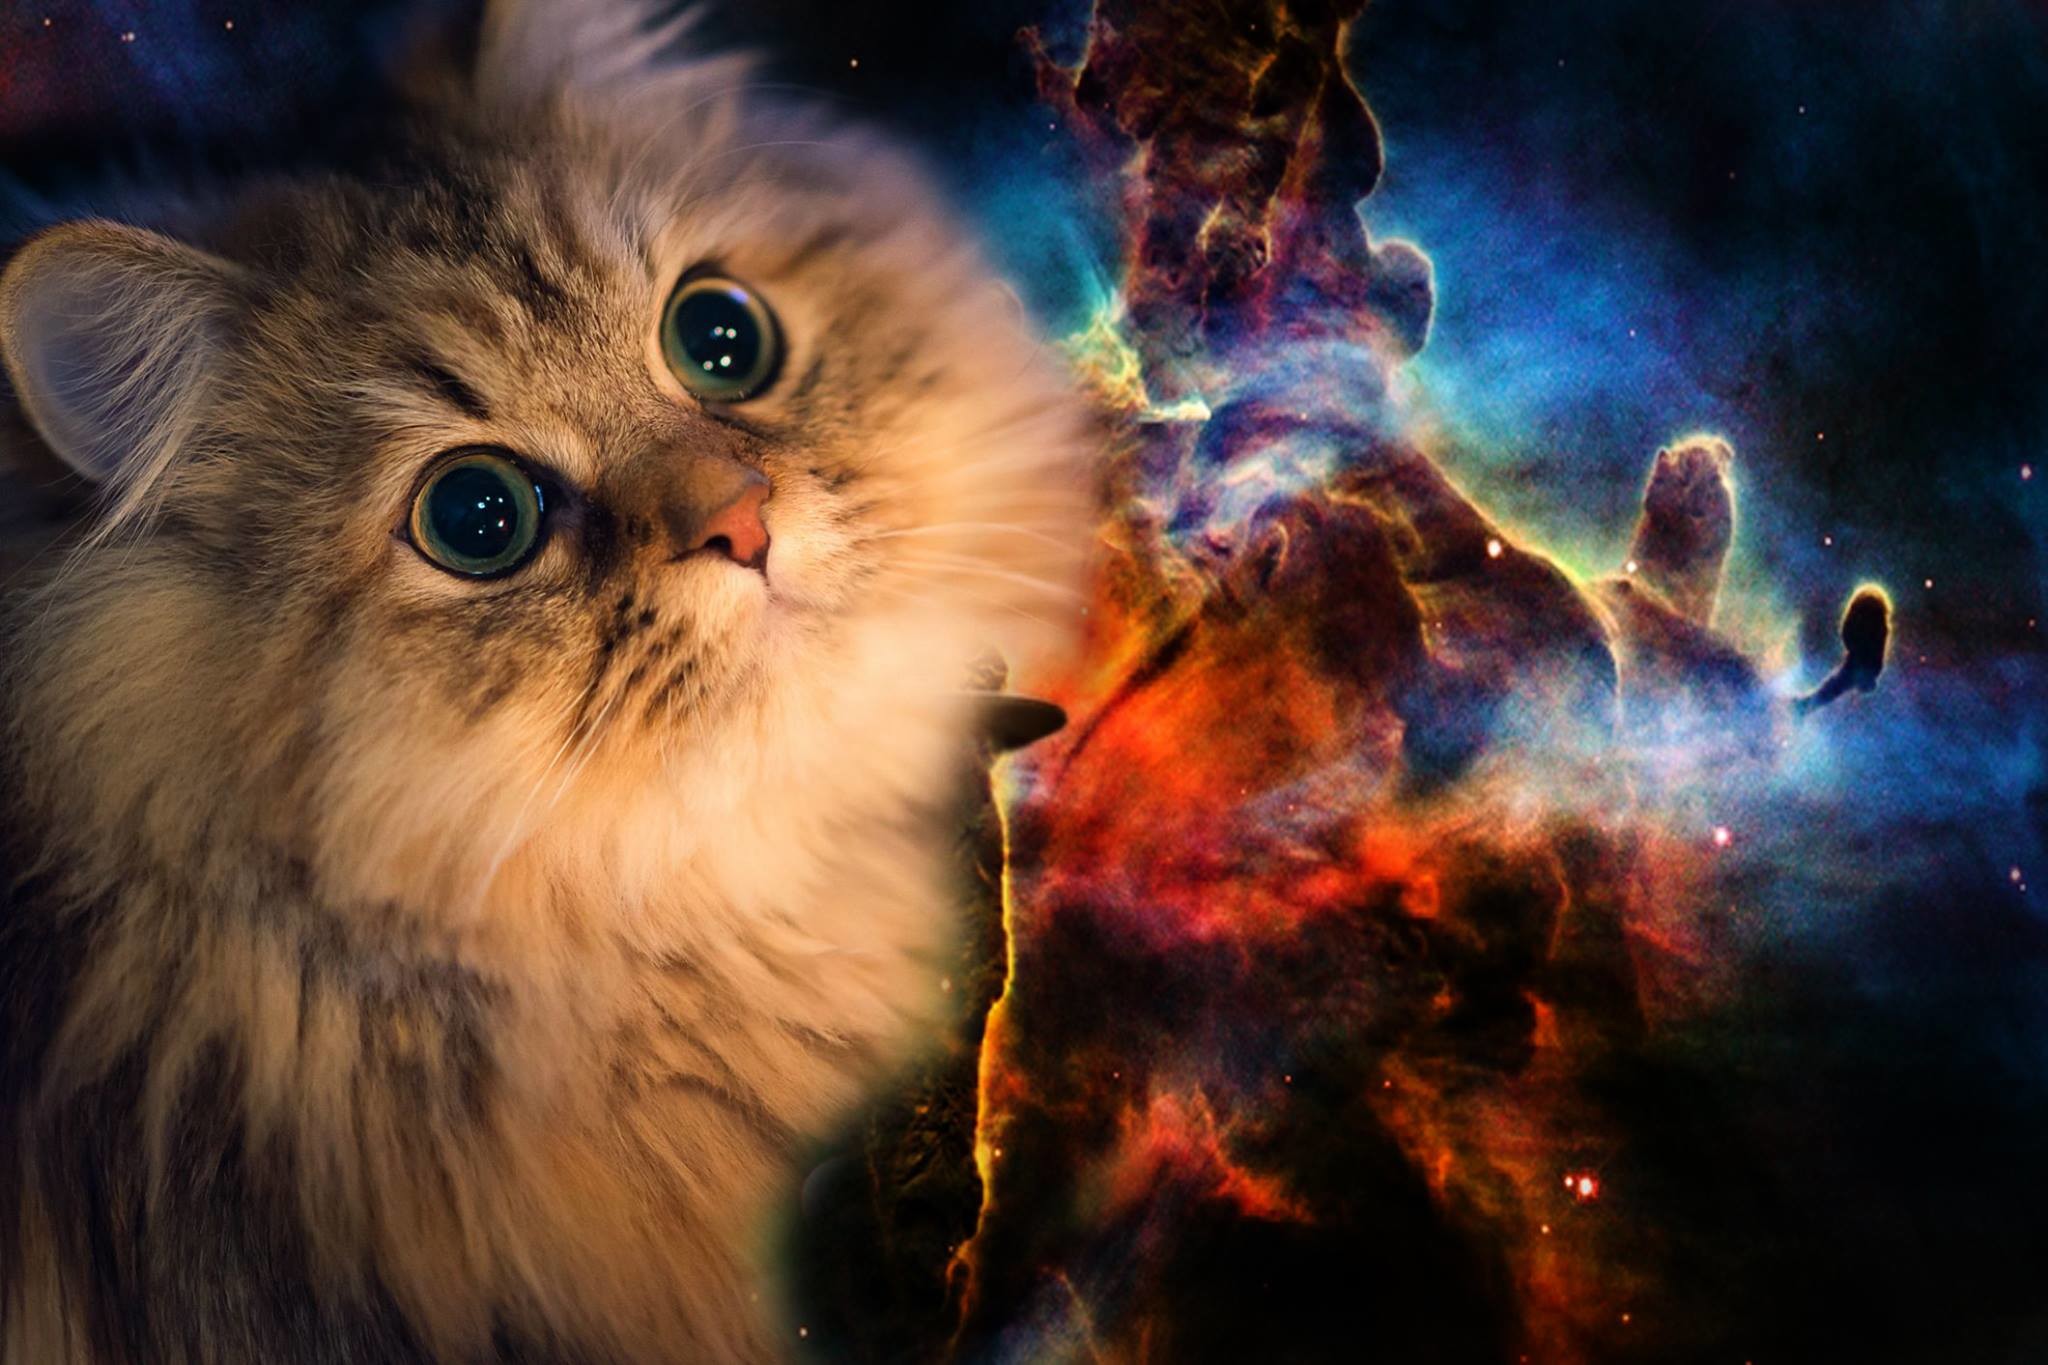 Collection of Galaxy Cat Wallpaper on HDWallpapers Galaxy cat wallpaper Wallpapers